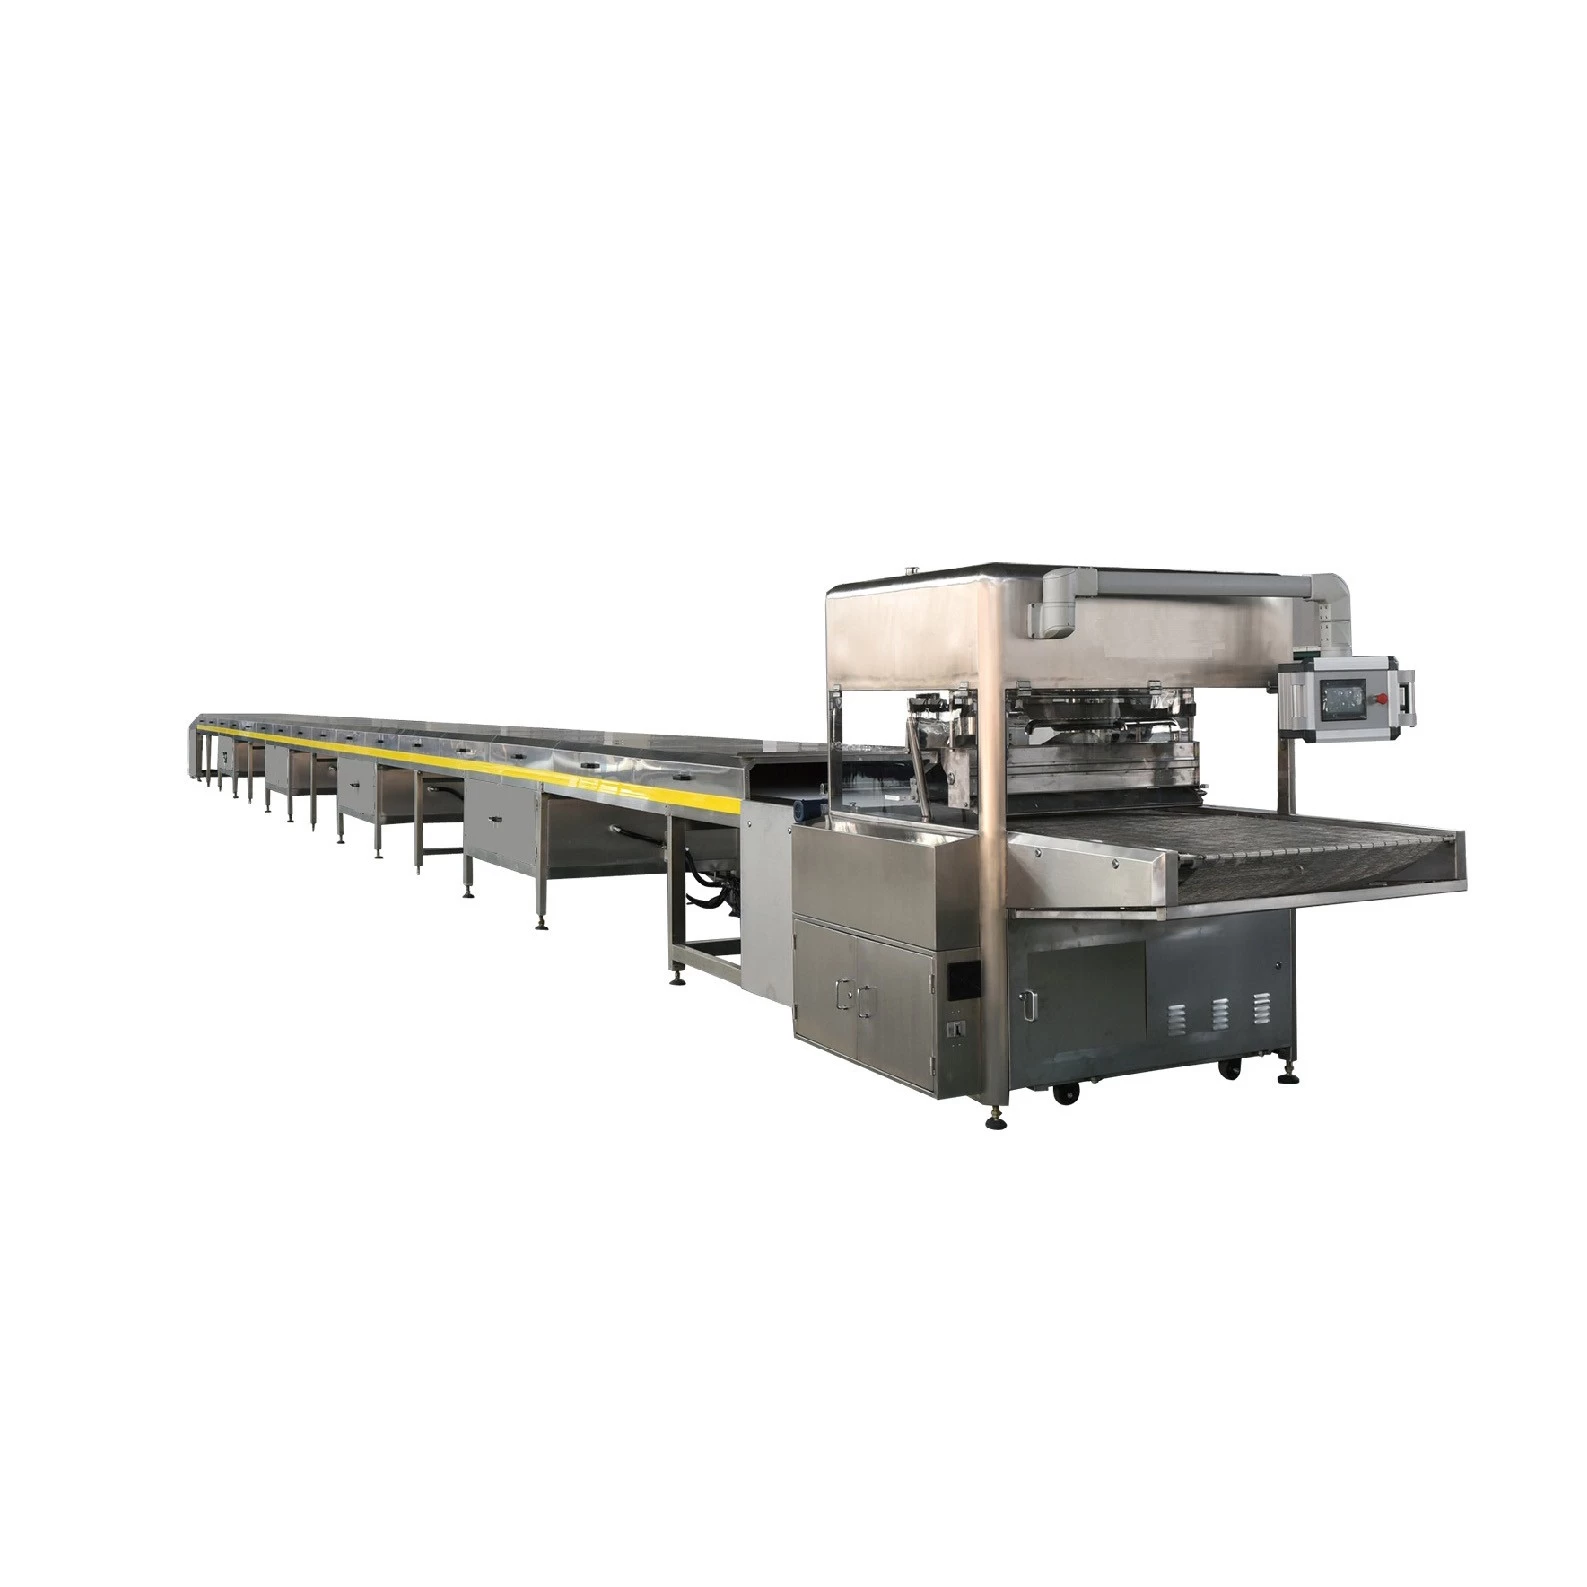 China Small Mini Commercial Making Chocolate Belt Enrobing Cookies Coating Covering Machine fabricante